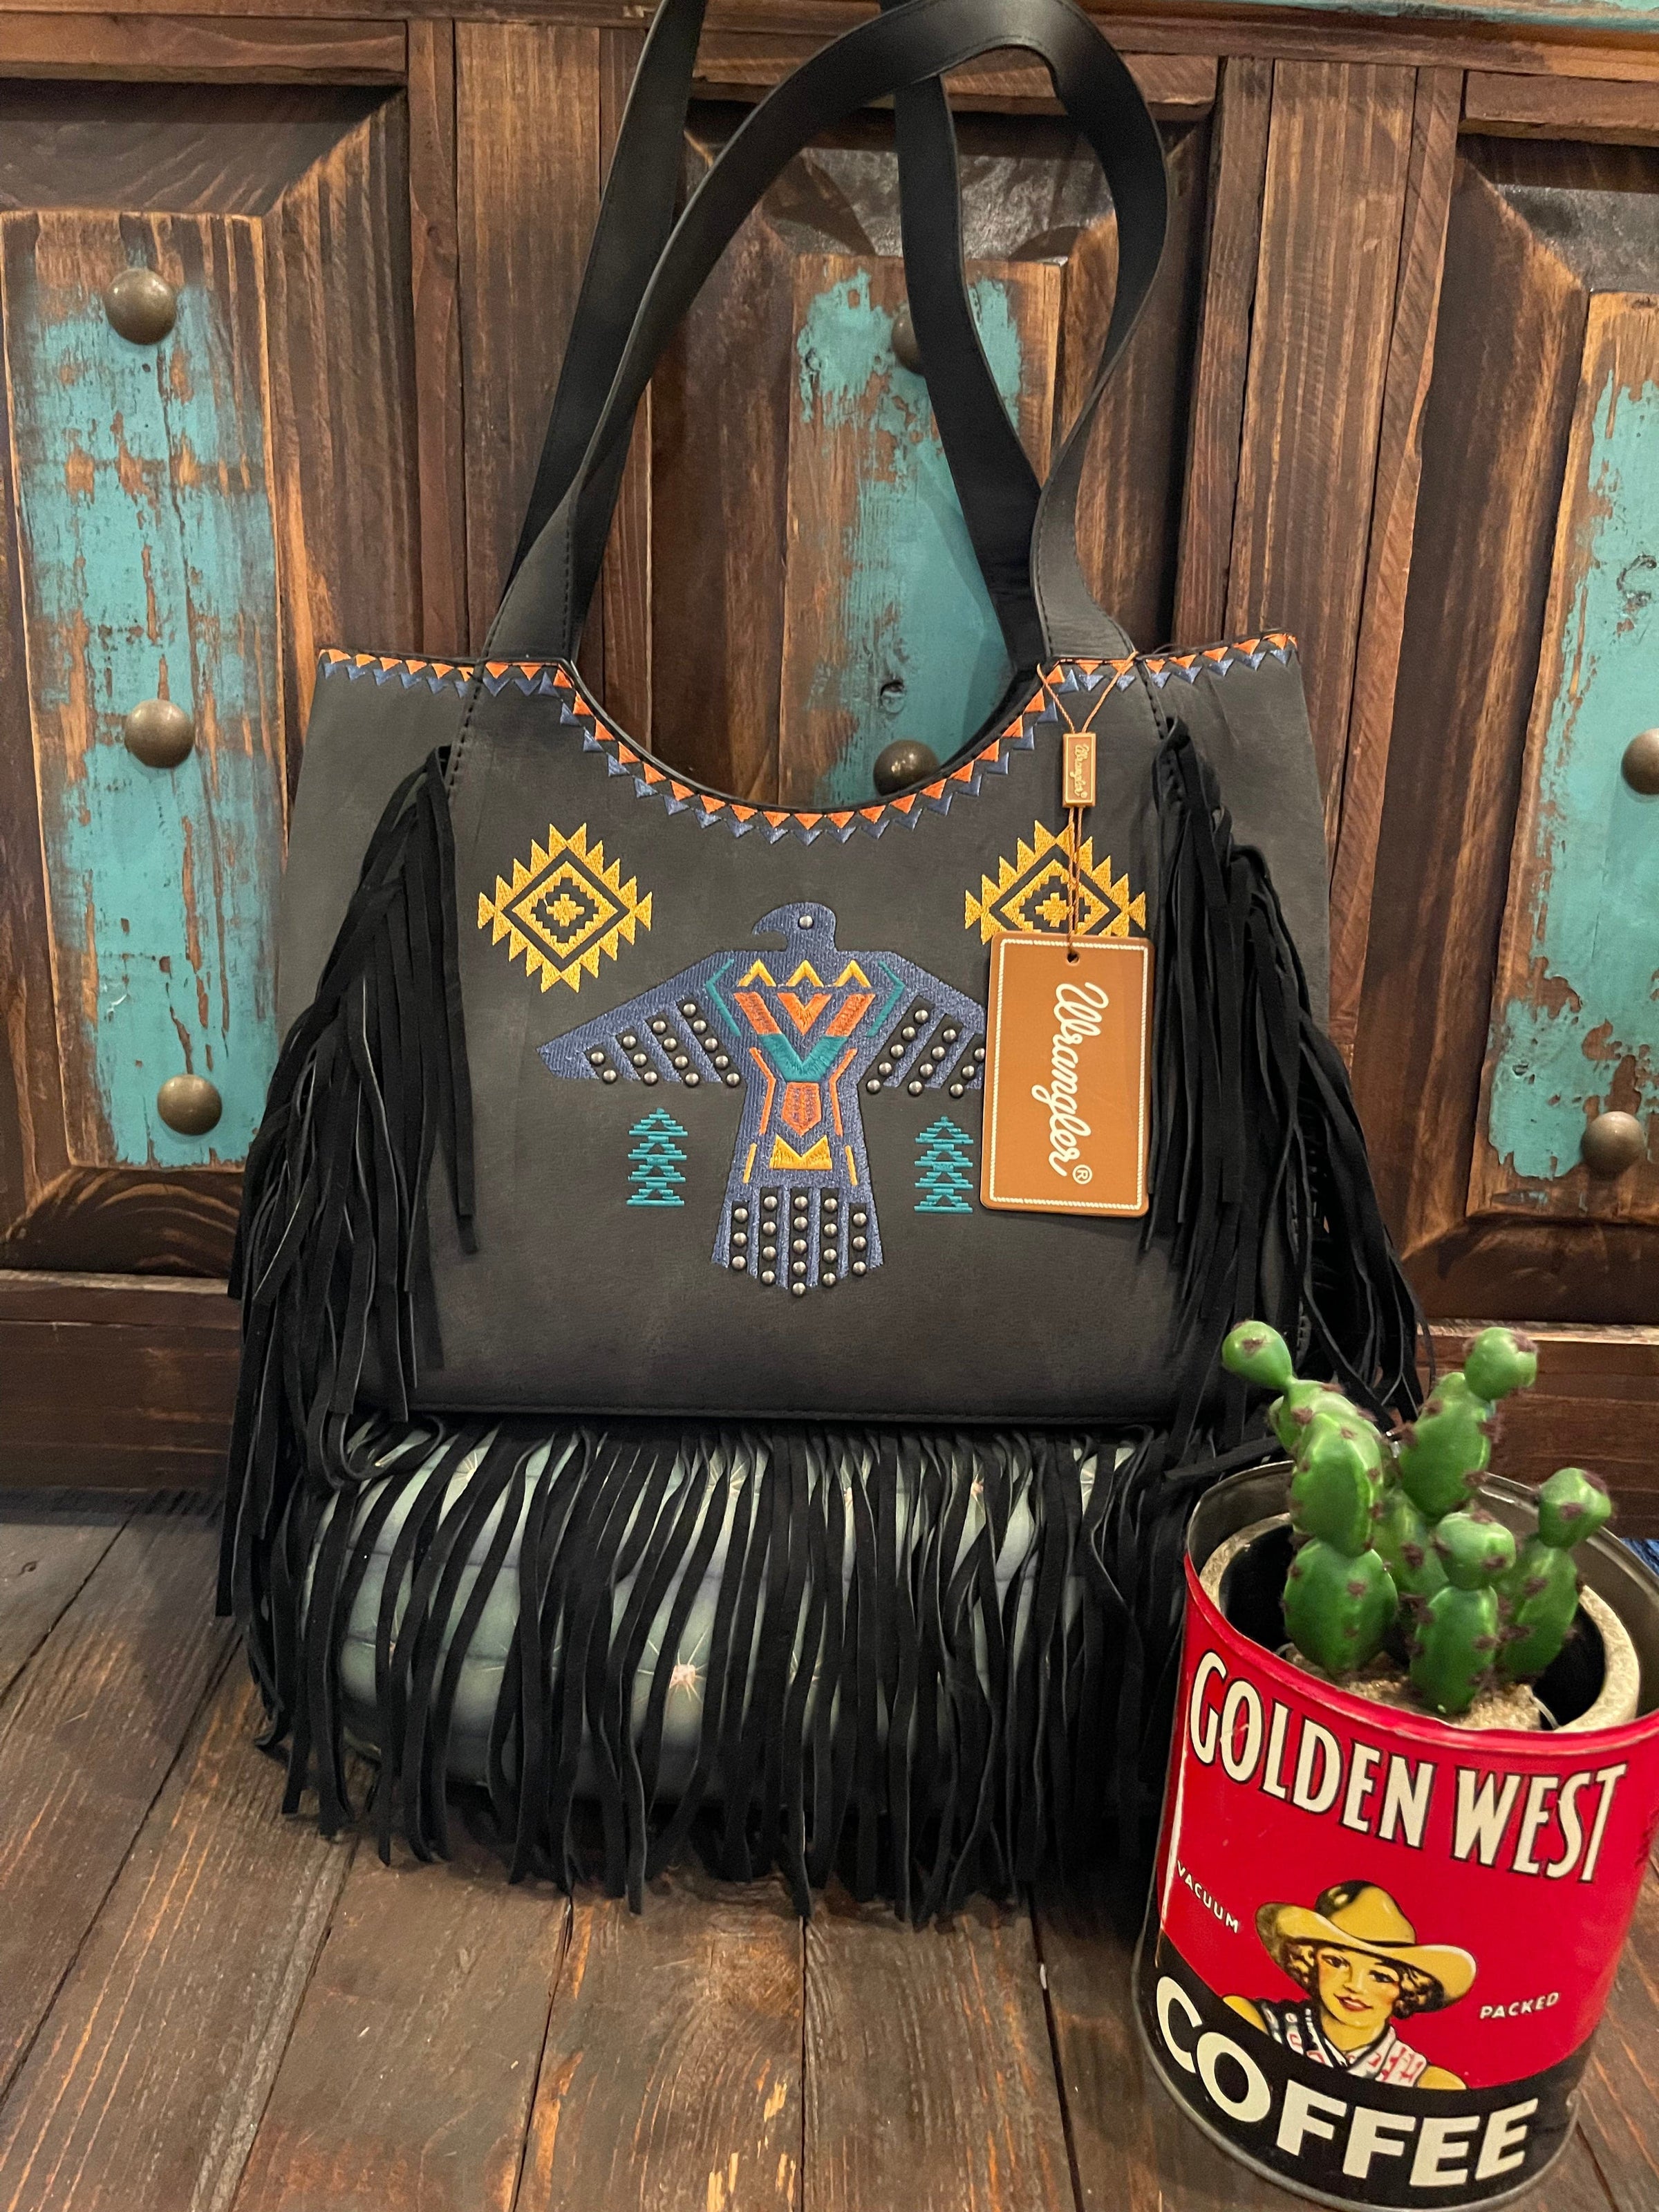 Wrangler leather TOTE purse – Southwest Bedazzle